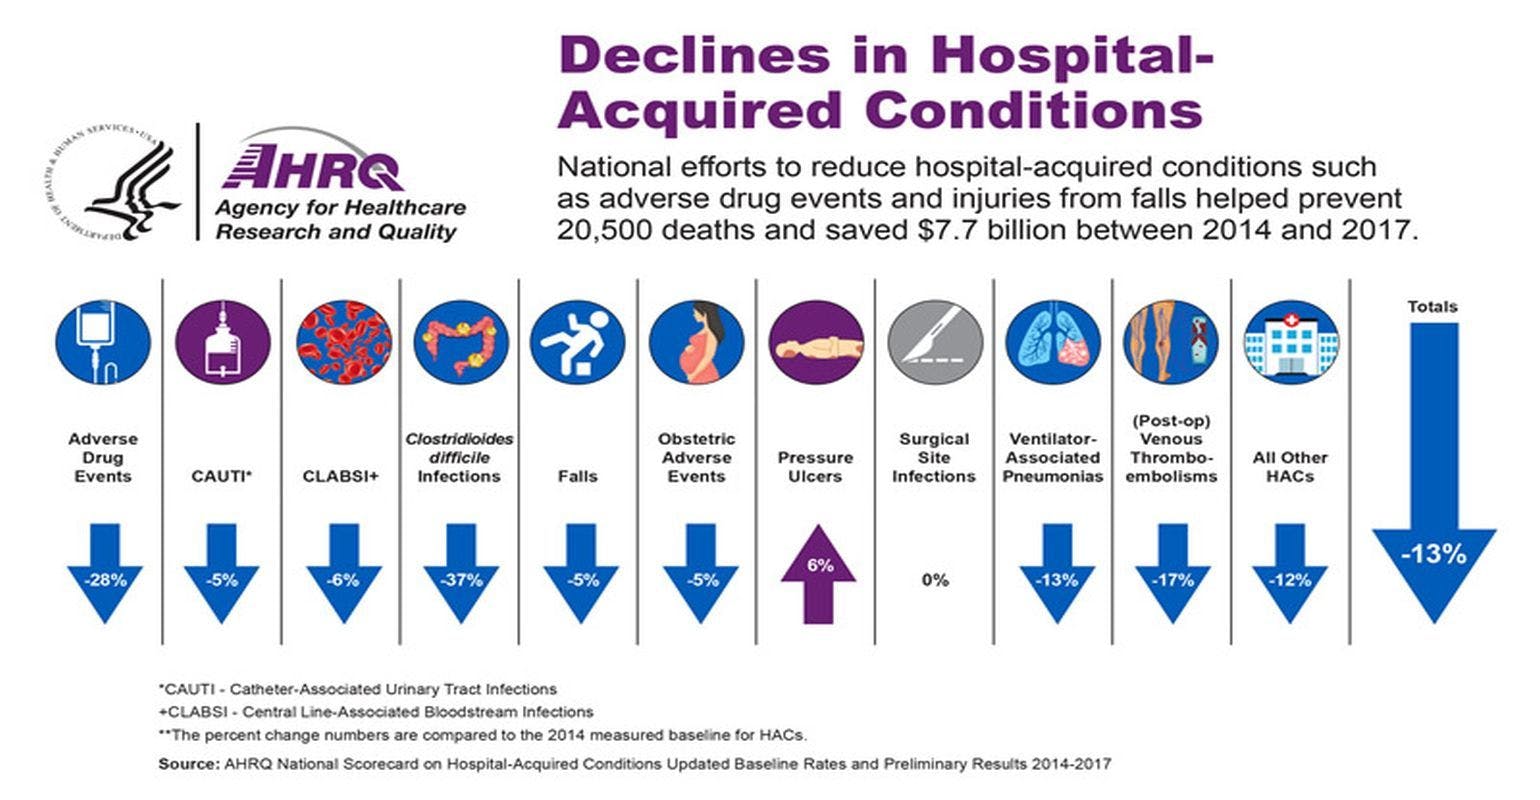 AHRQ Analysis Finds Hospital-Acquired Conditions Declined By Nearly 1 Million From 2014 to 2017